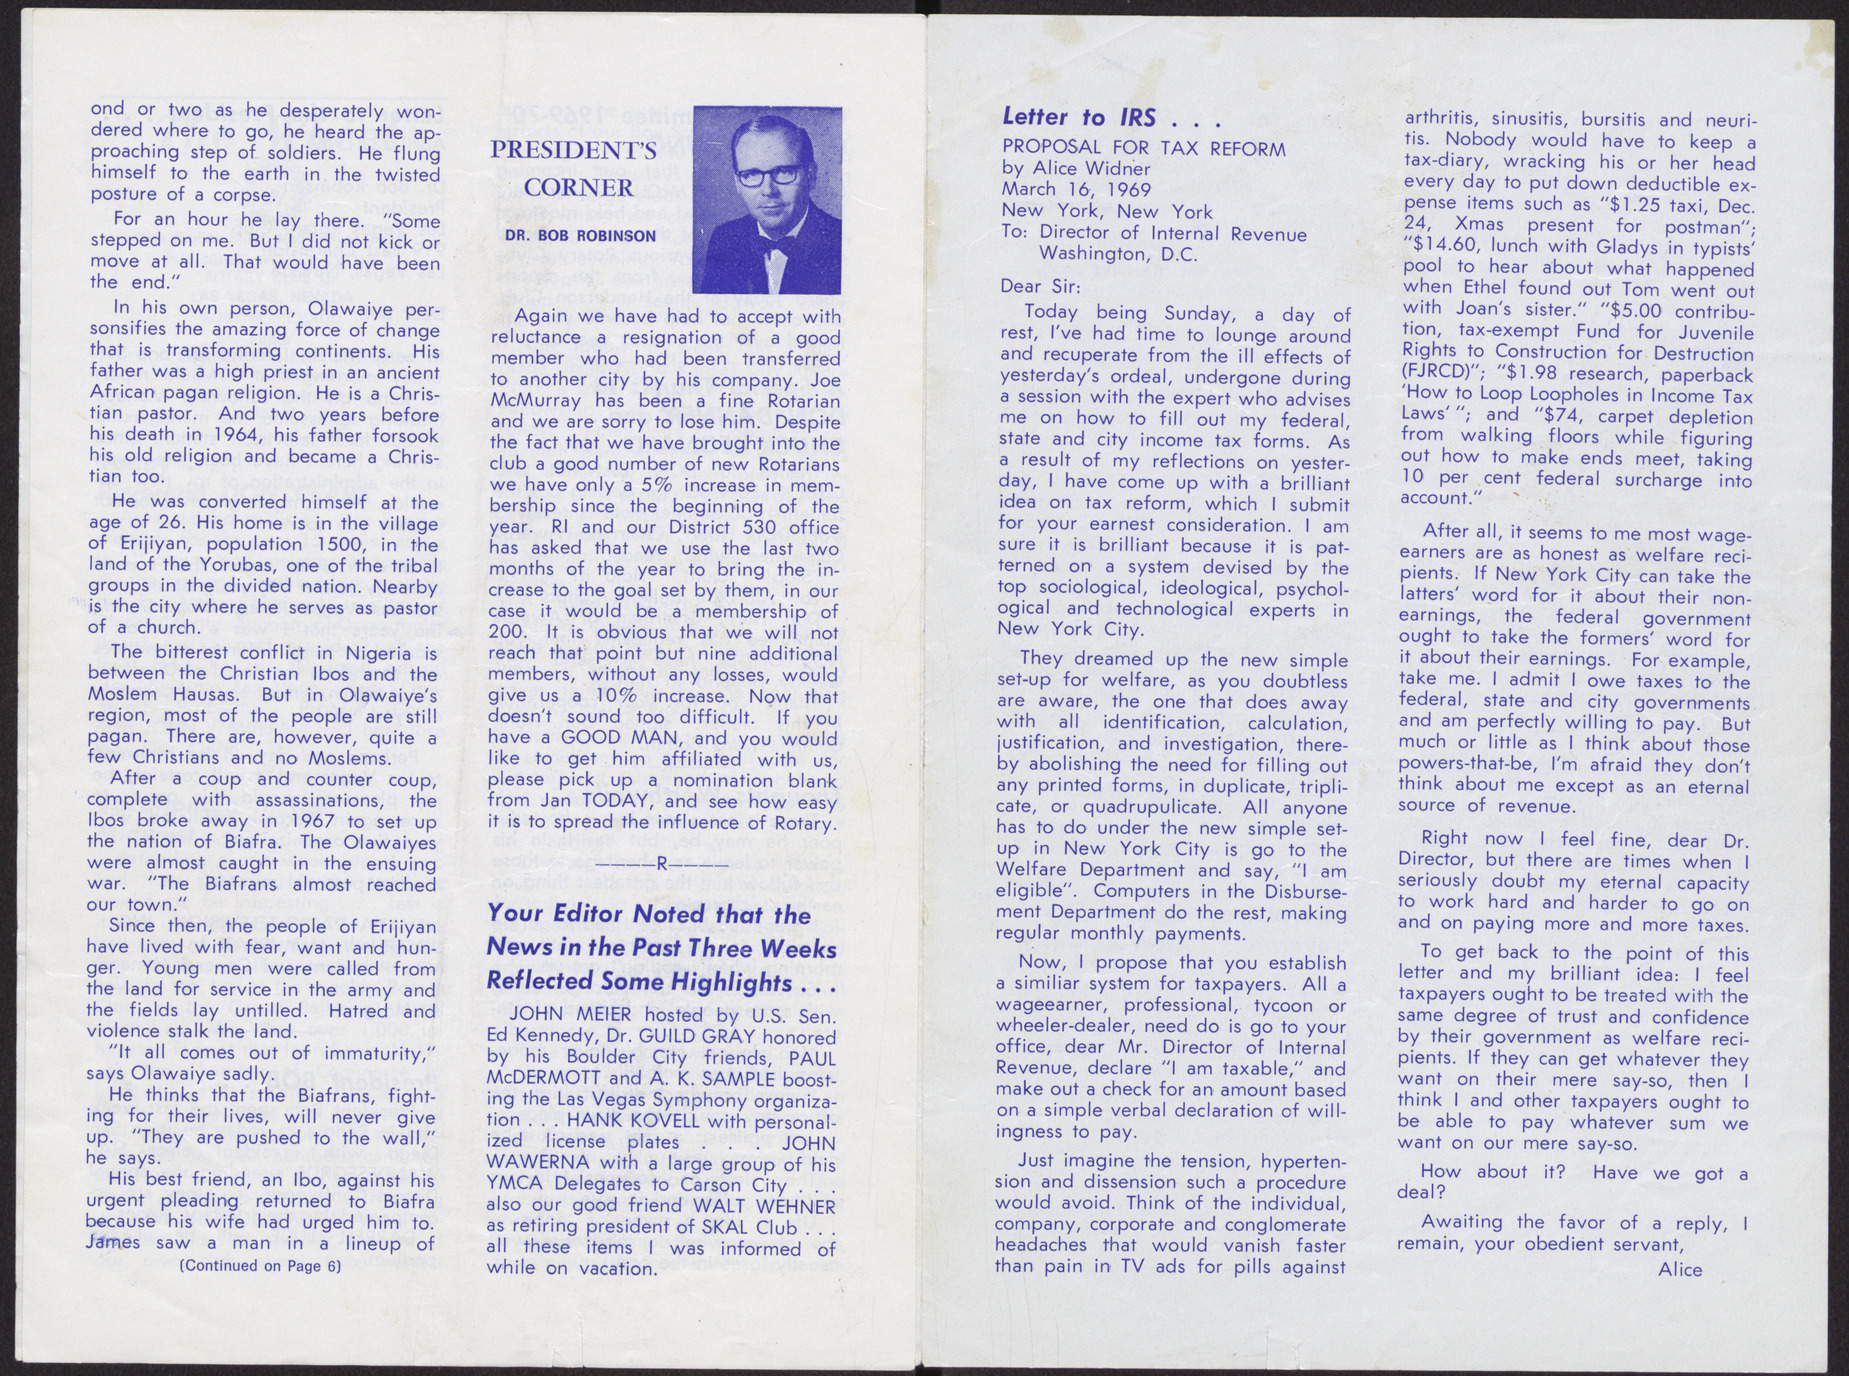 Las Vegas Rotary Club meeting program (6 pages), May 1, 1969, page 4-5